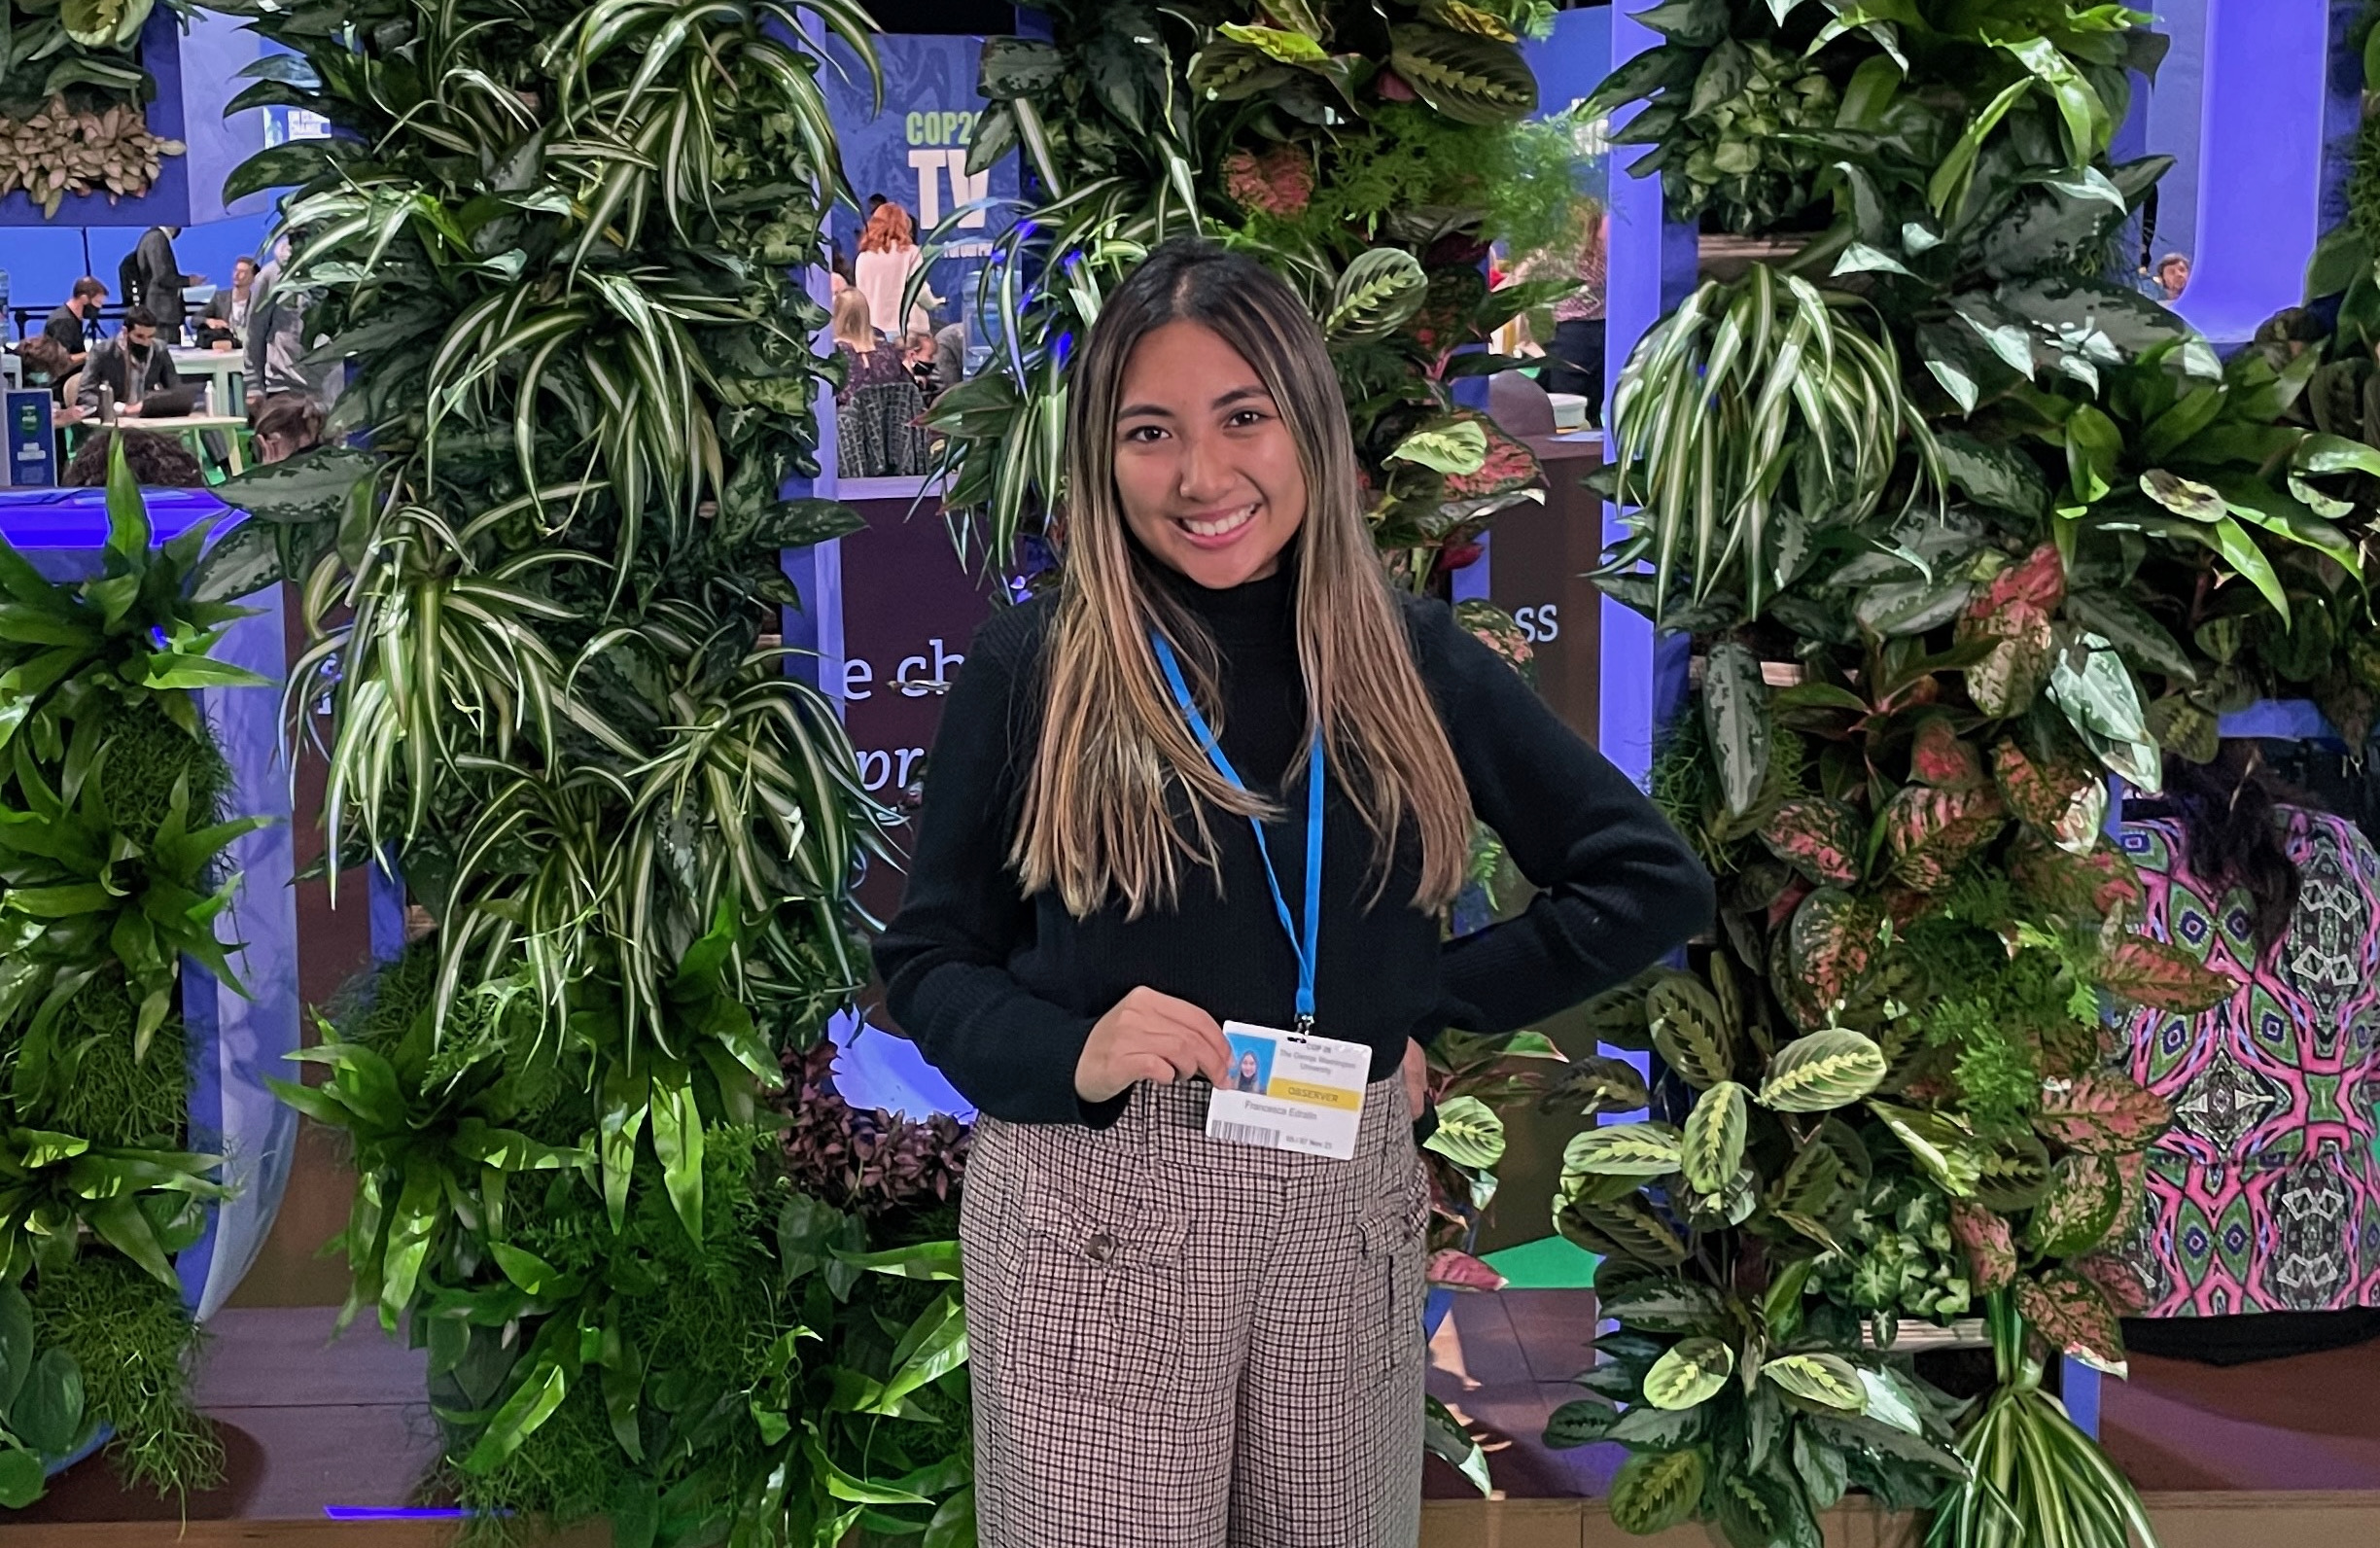 GW Student Attends COP26 Conference 